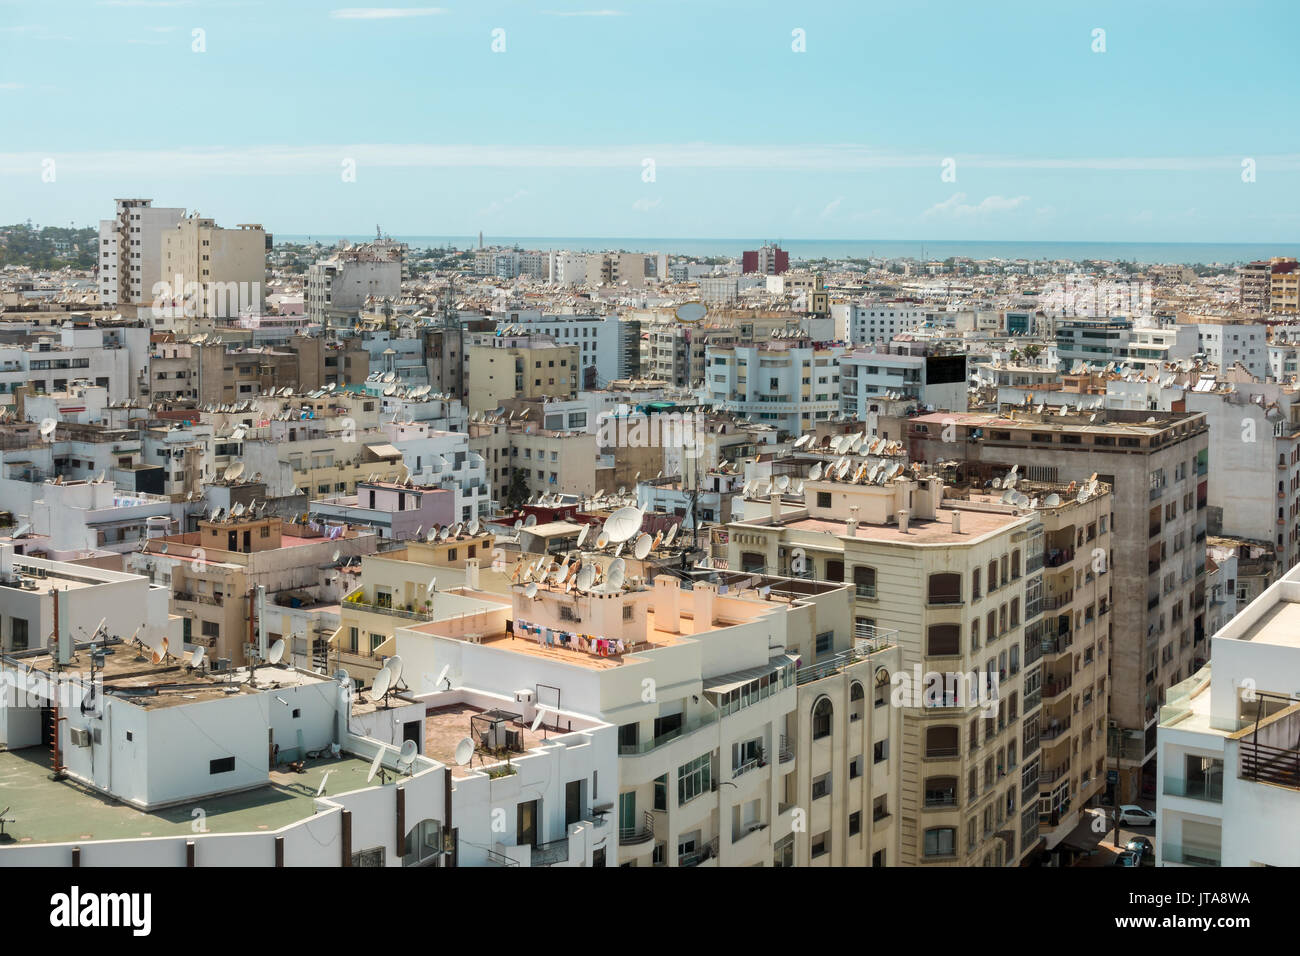 View over the city of Casablanca with the sea in the background. Stock Photo